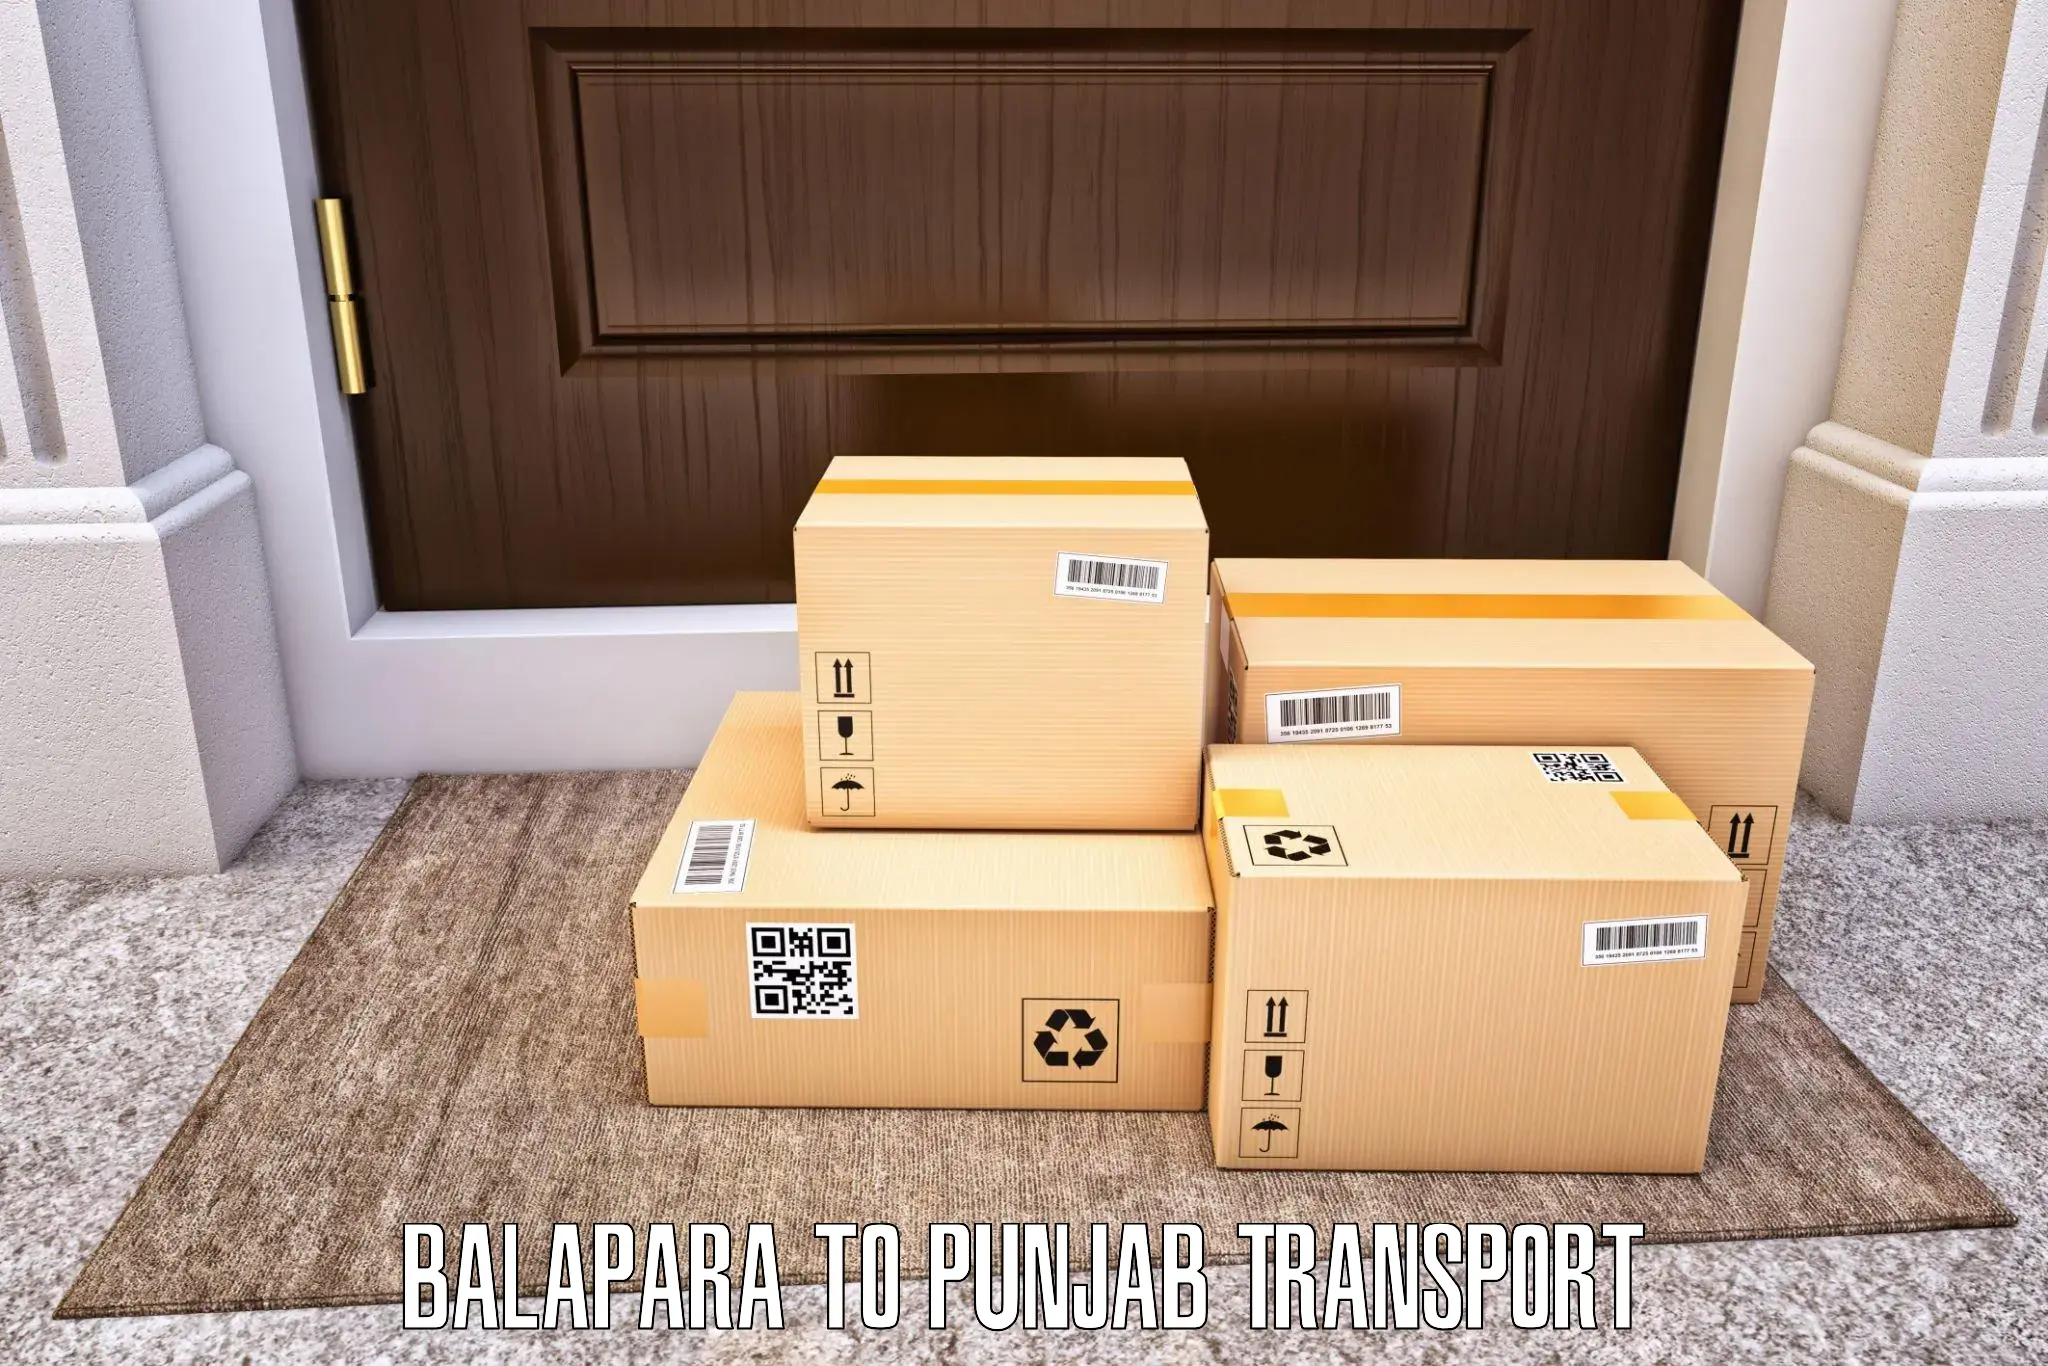 Transport shared services Balapara to Sultanpur Lodhi